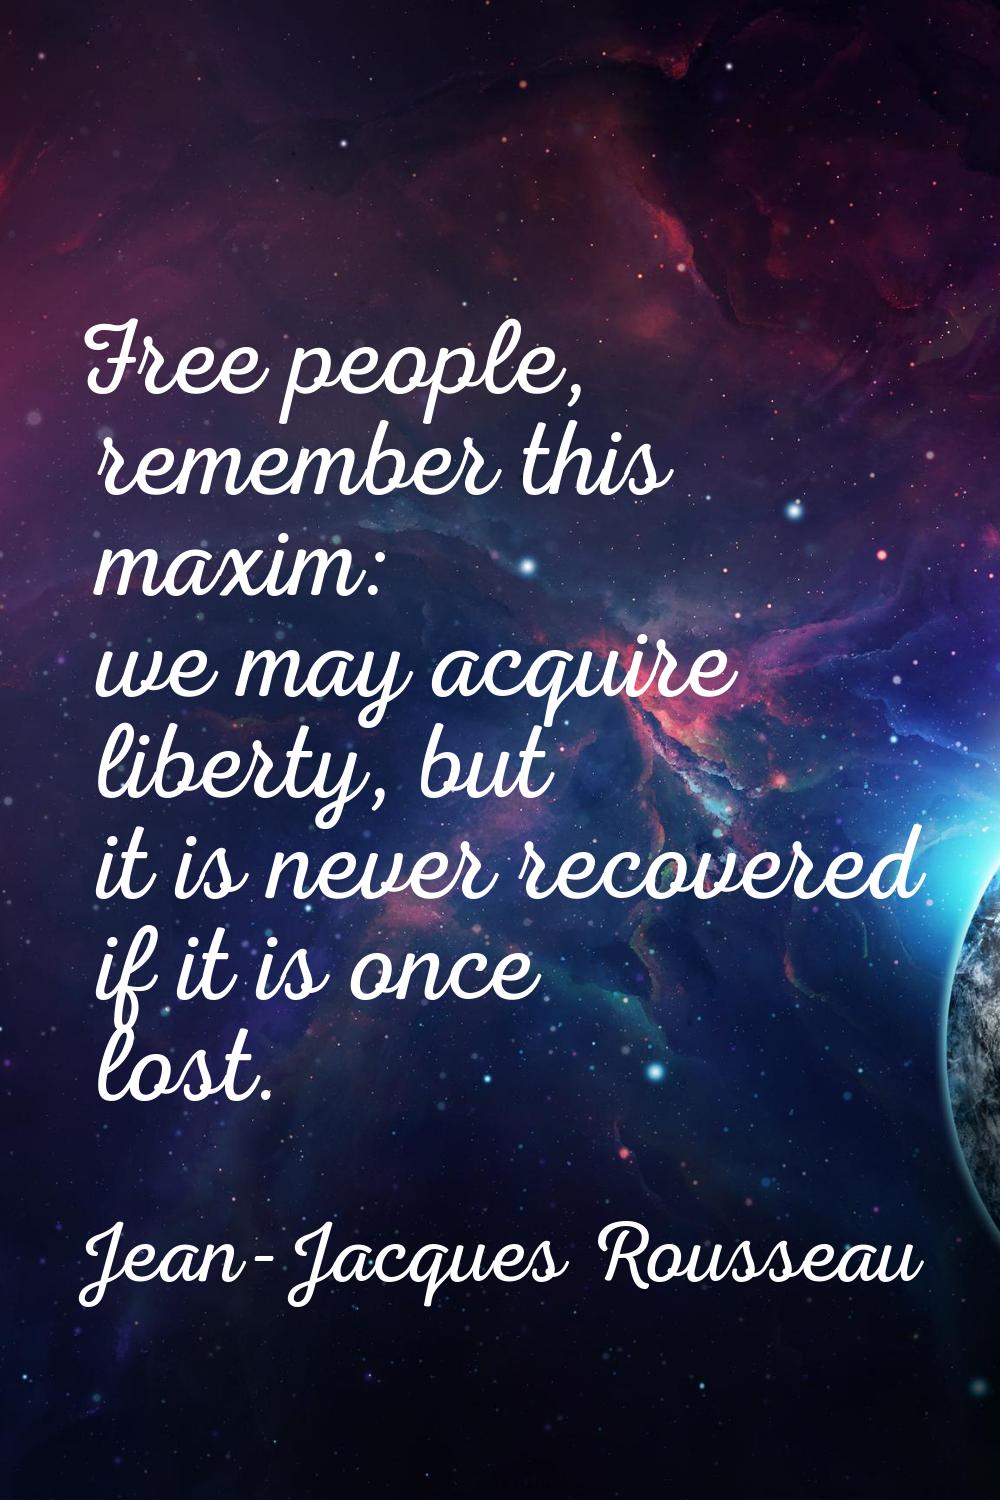 Free people, remember this maxim: we may acquire liberty, but it is never recovered if it is once l